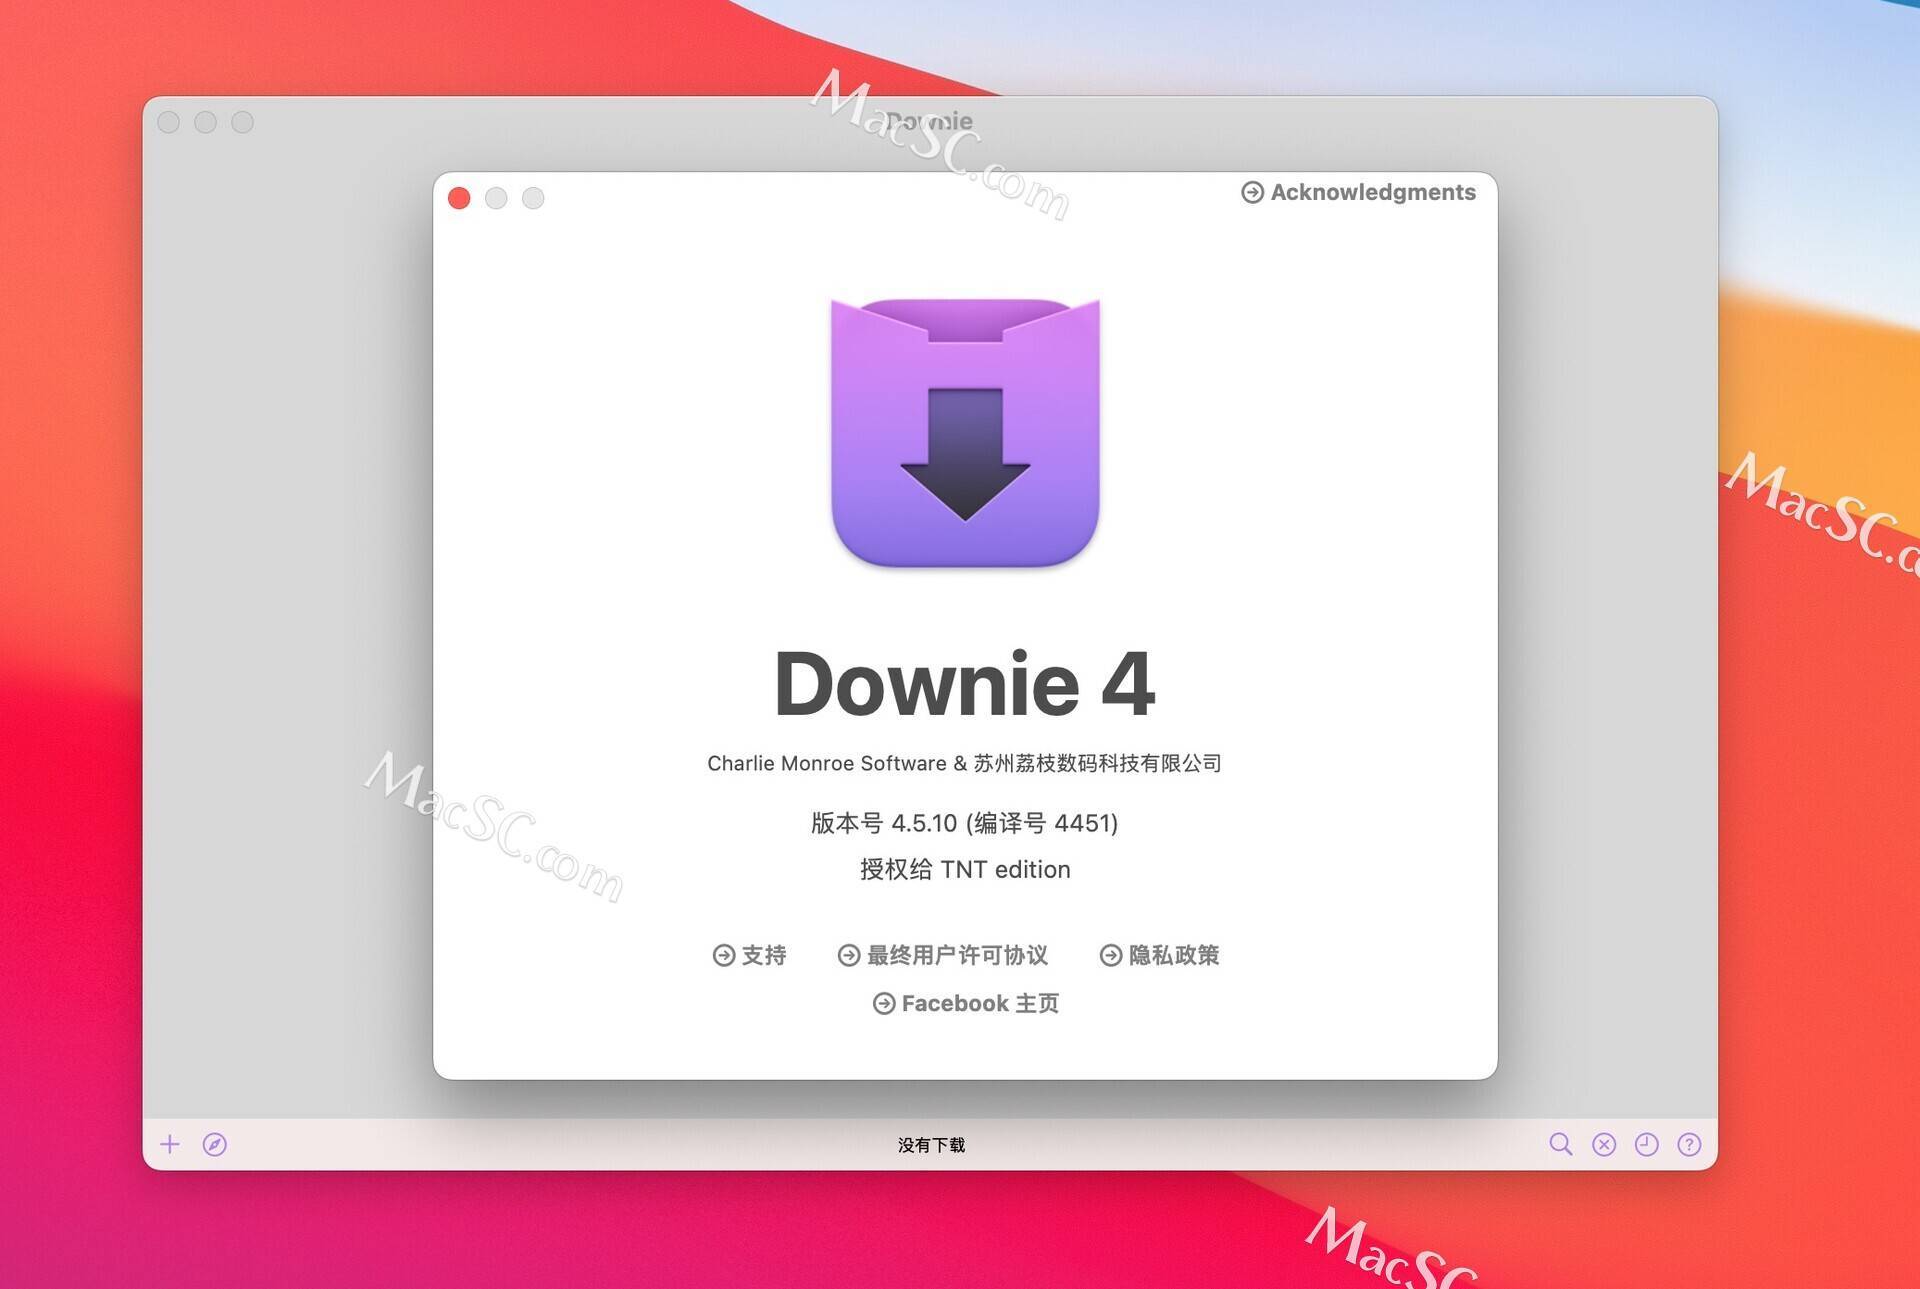 Downie 4 download the new for android